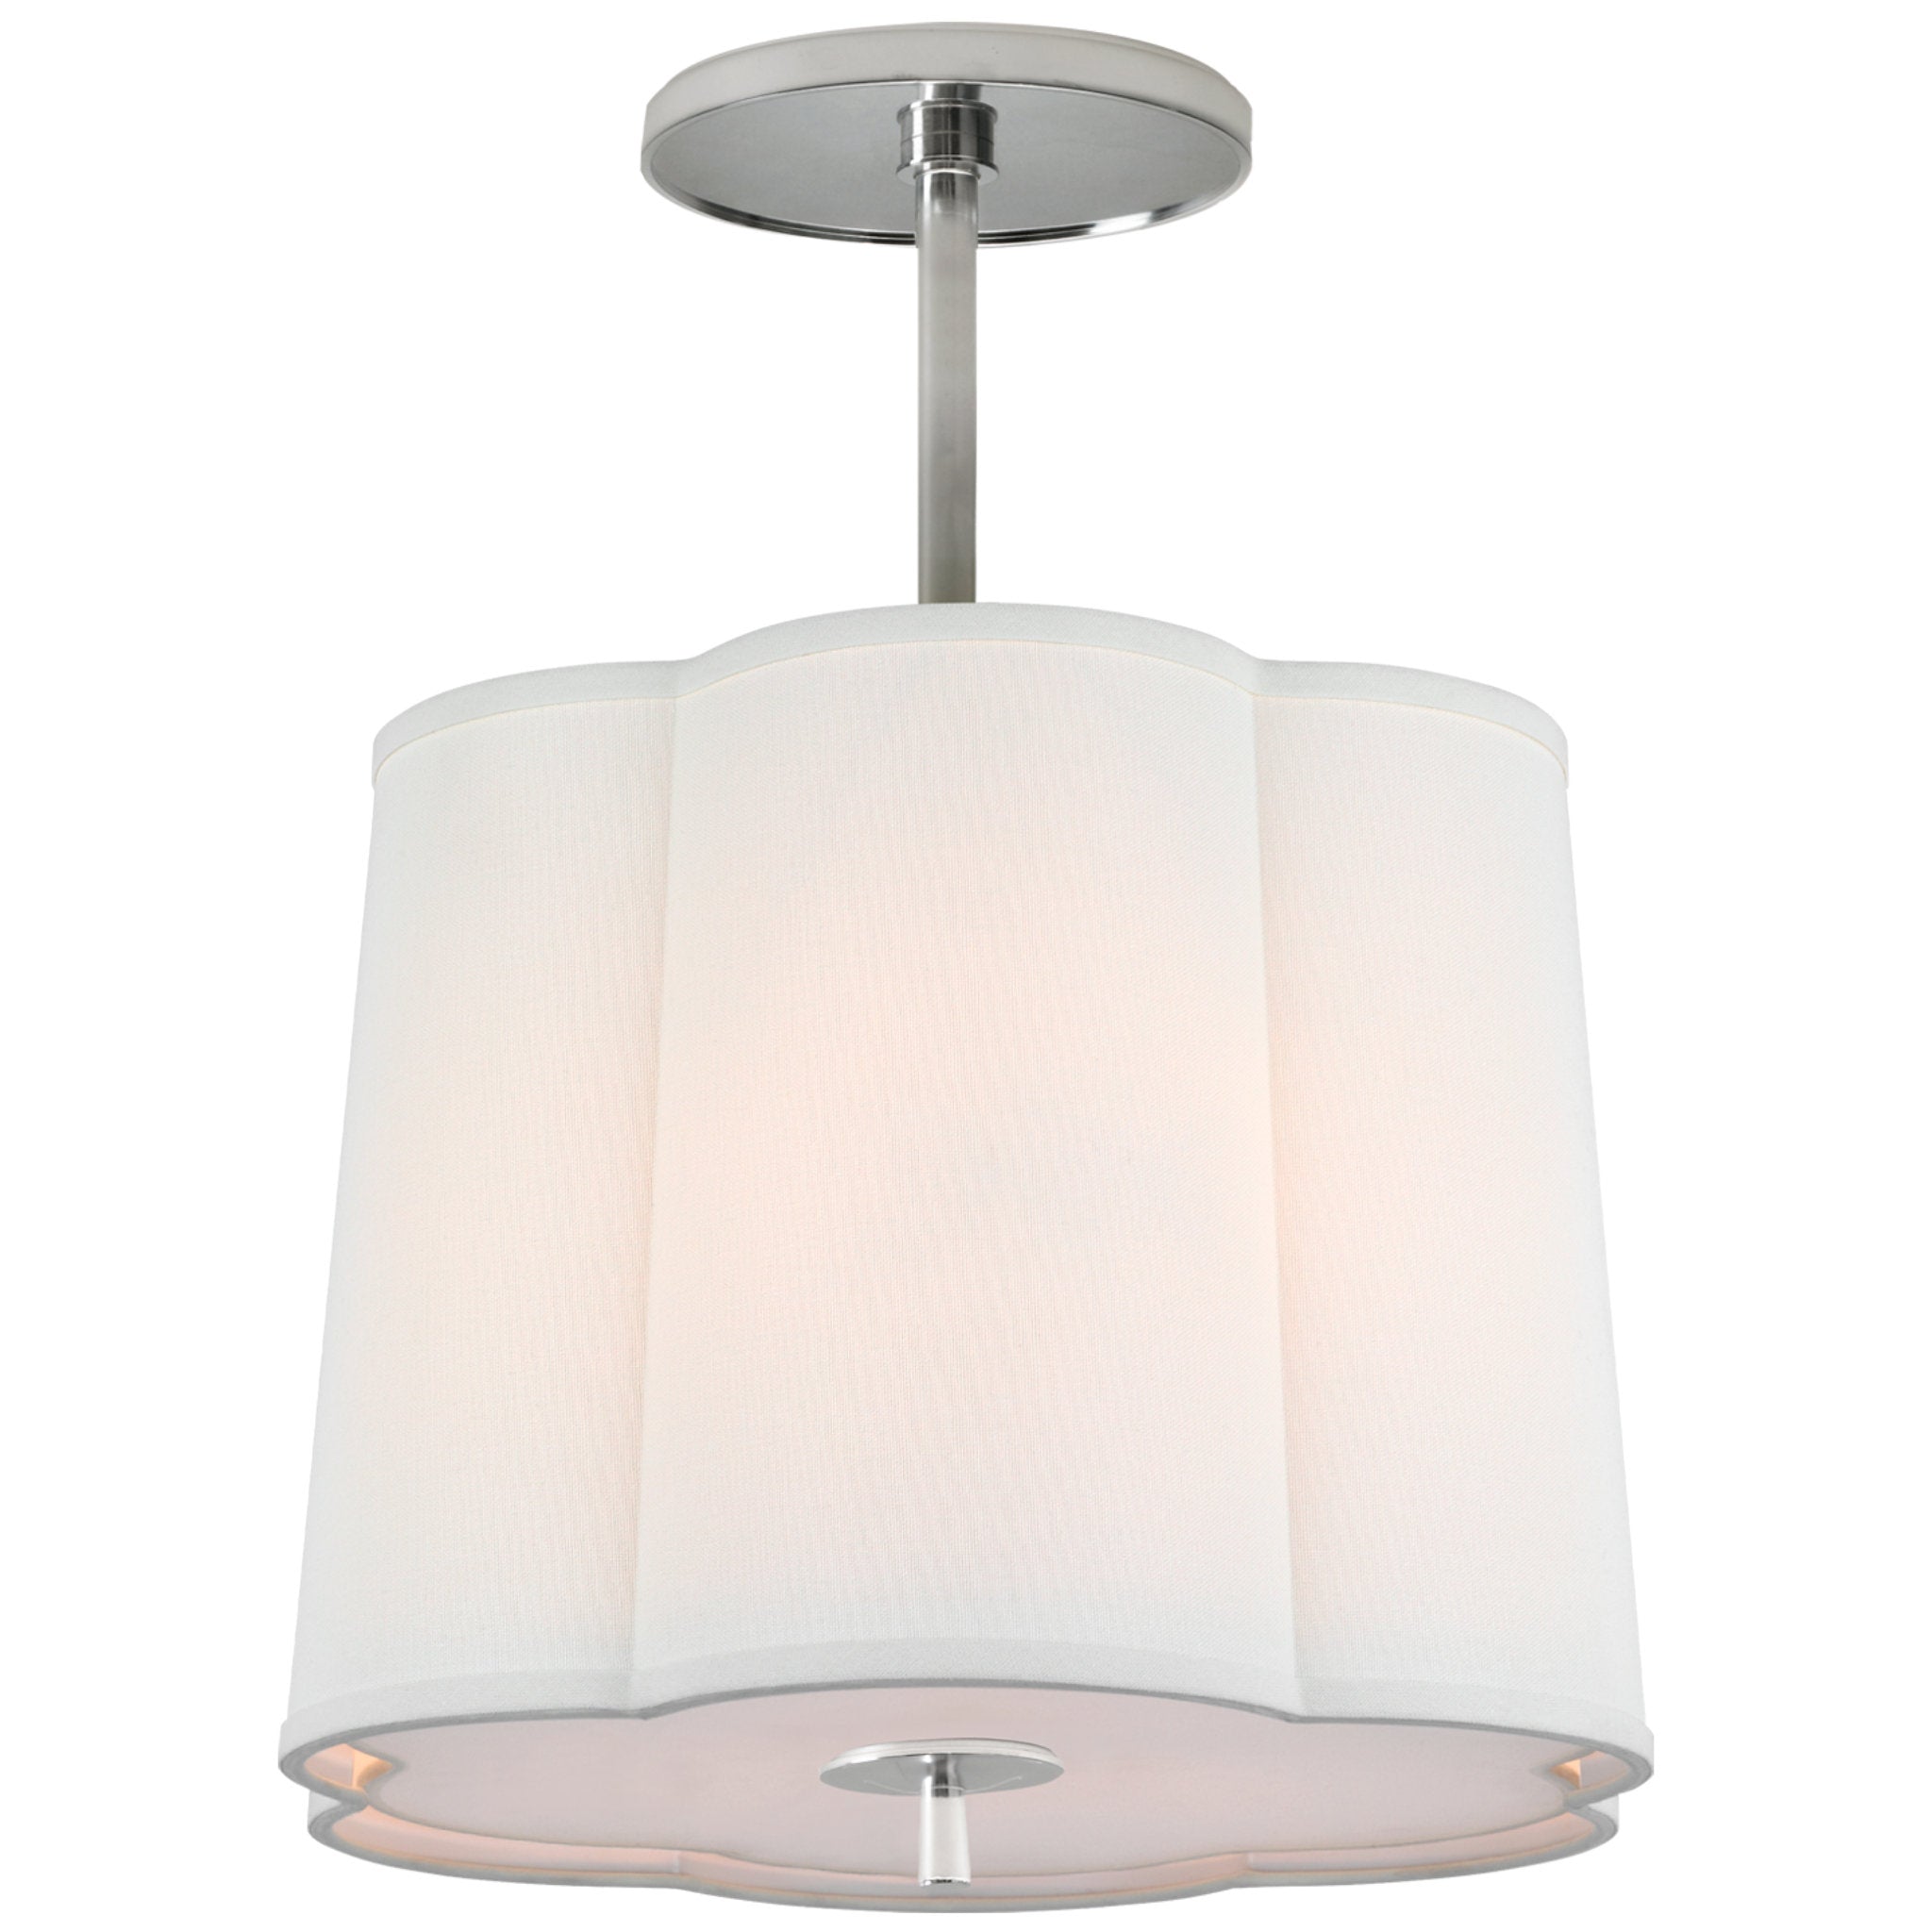 Barbara Barry Simple Scallop Hanging Shade in Soft Silver with Linen Shade